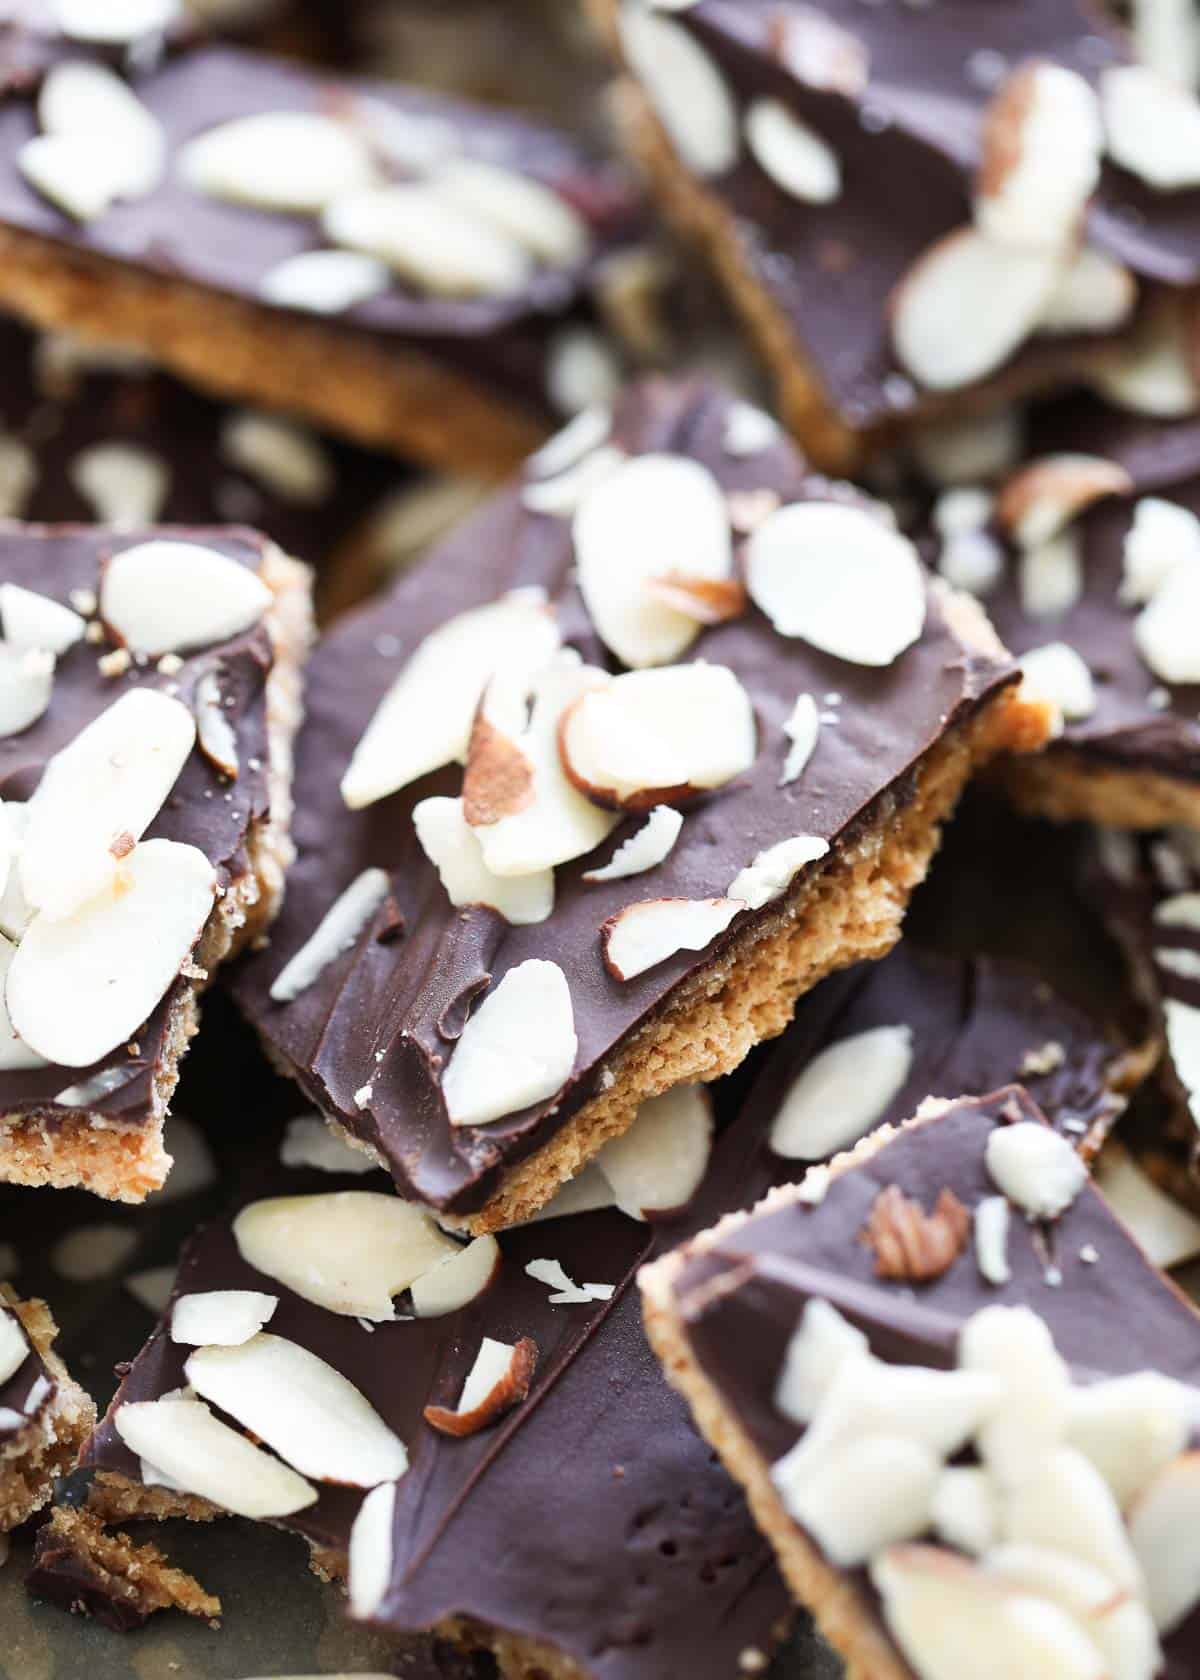 Graham cracker toffee on a plate.